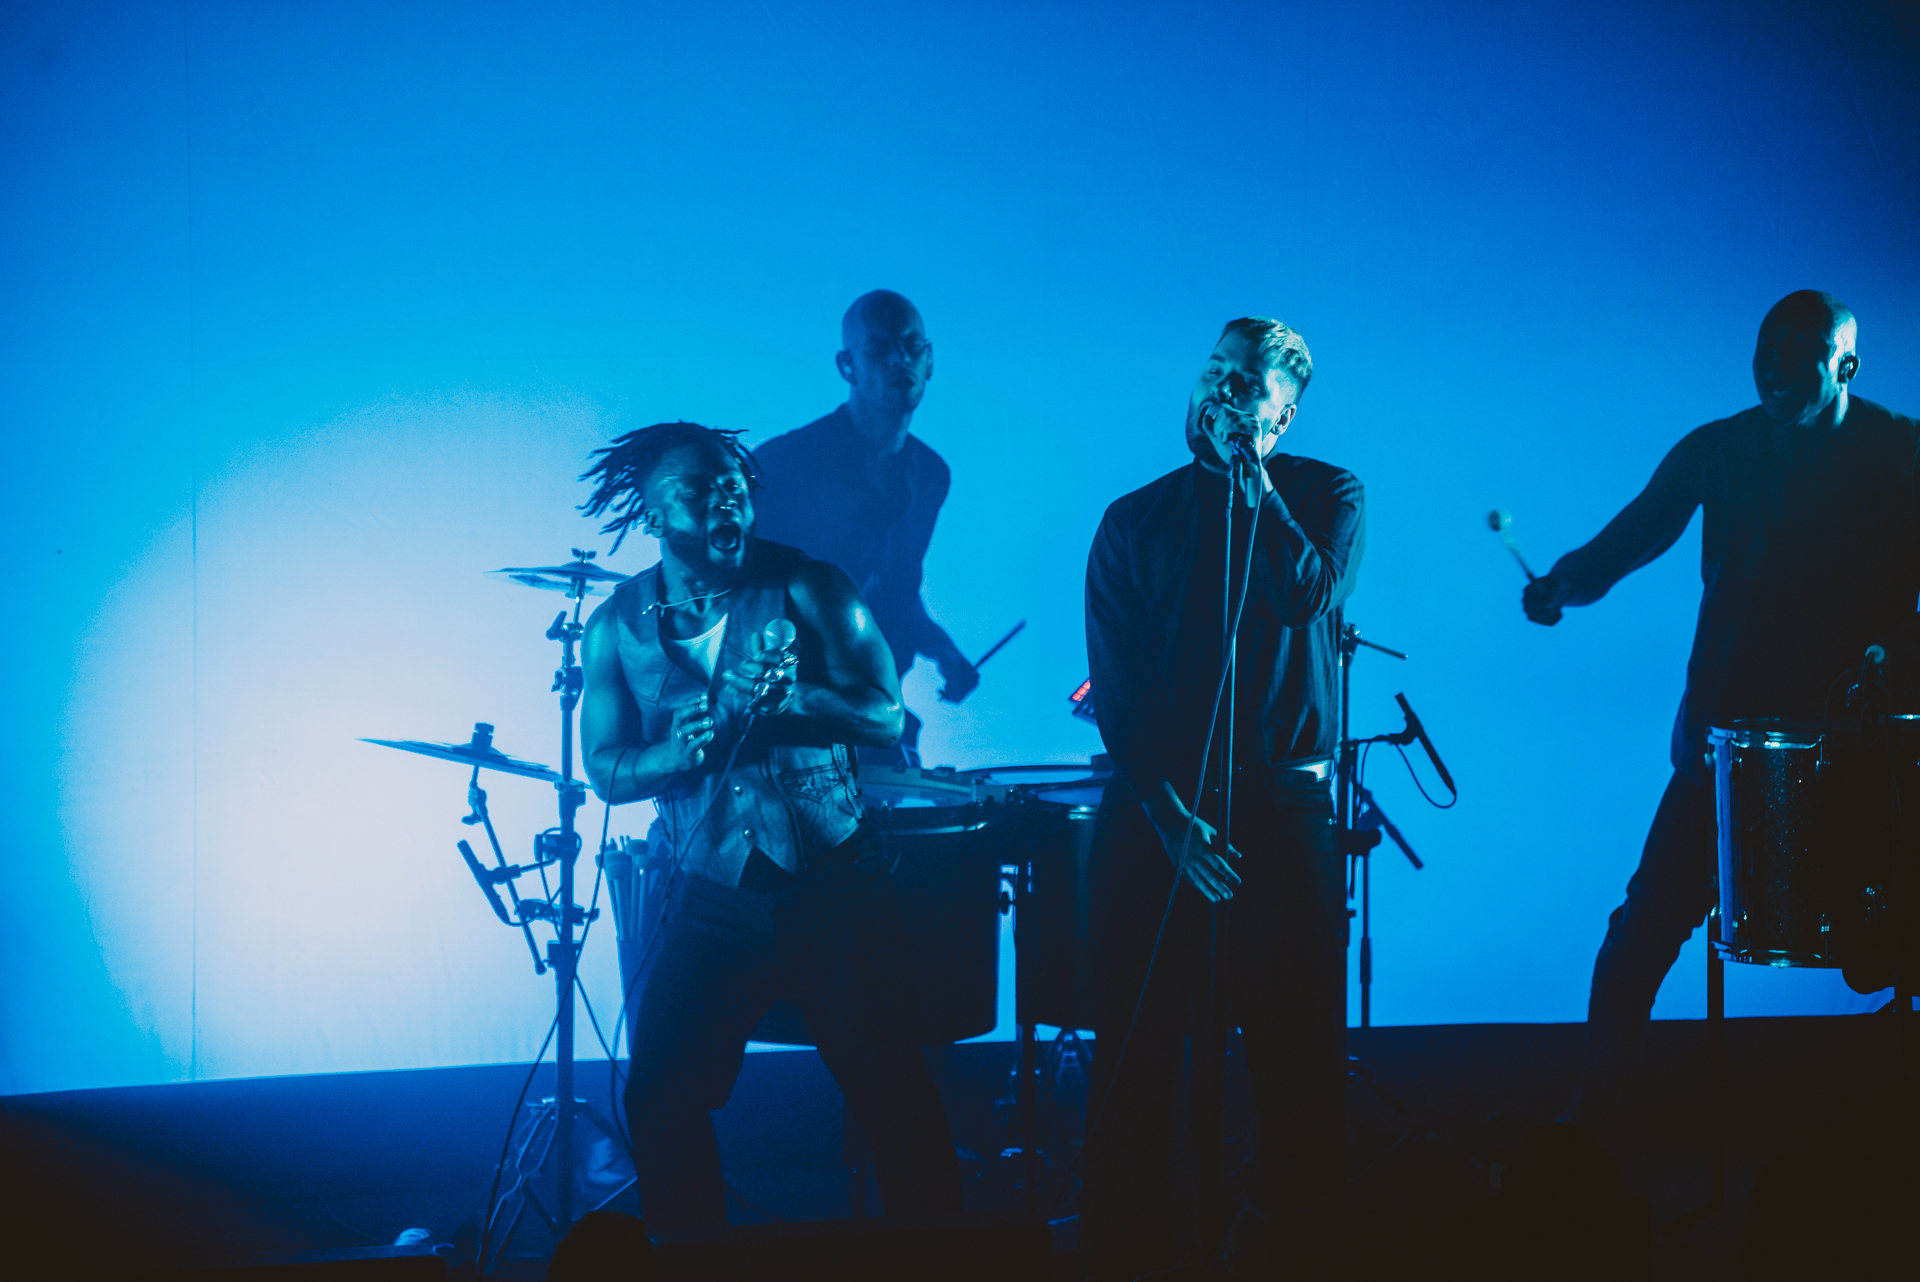 1_Young_Fathers-VENUE-Timothy_Nguyen-20181117 (20 of 23).jpg